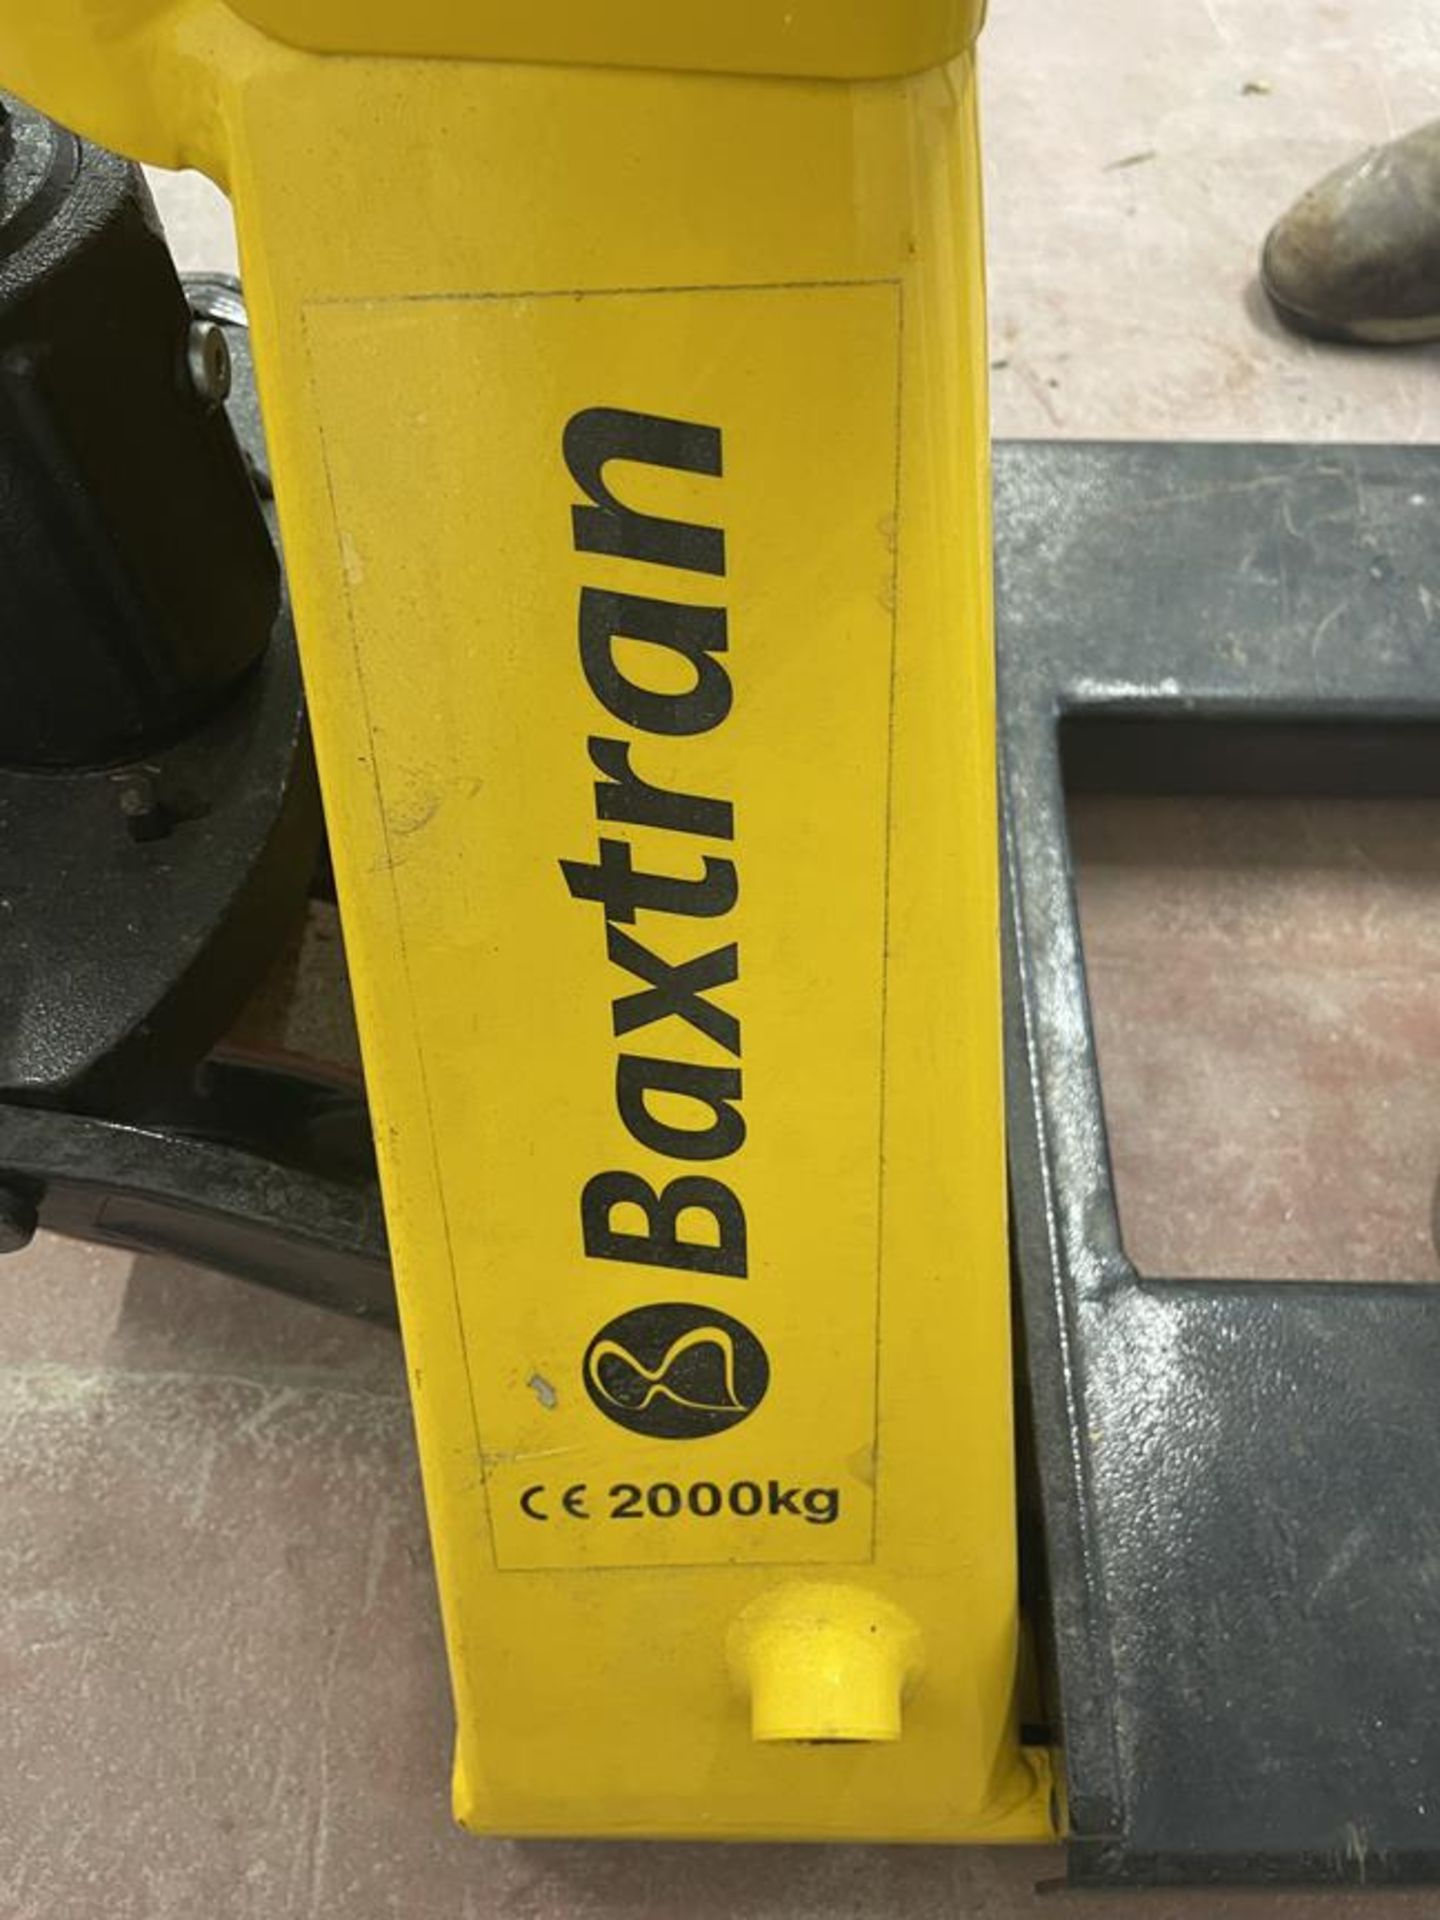 Baxtran, manual pallet truck with electronic weigh scale - Image 2 of 2